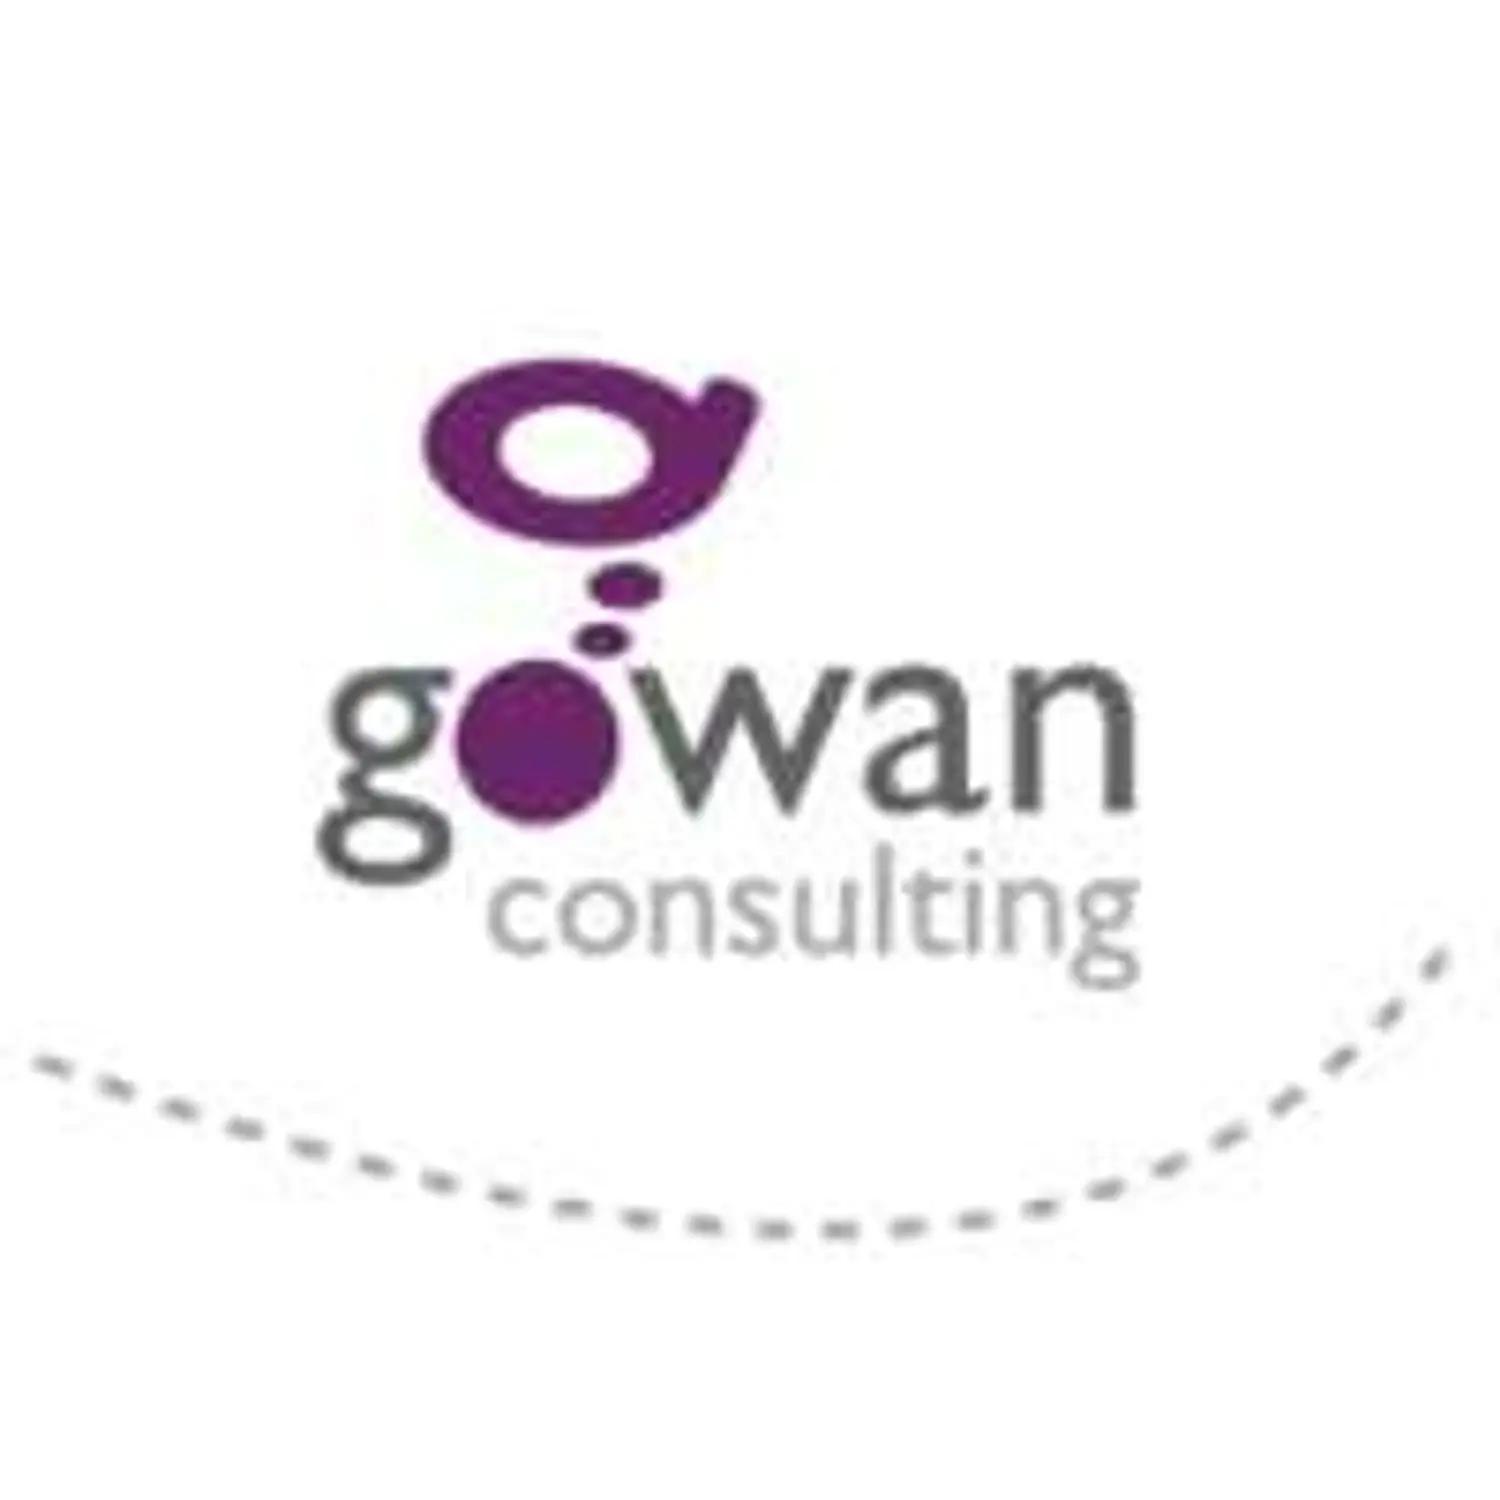 Gowan Consulting